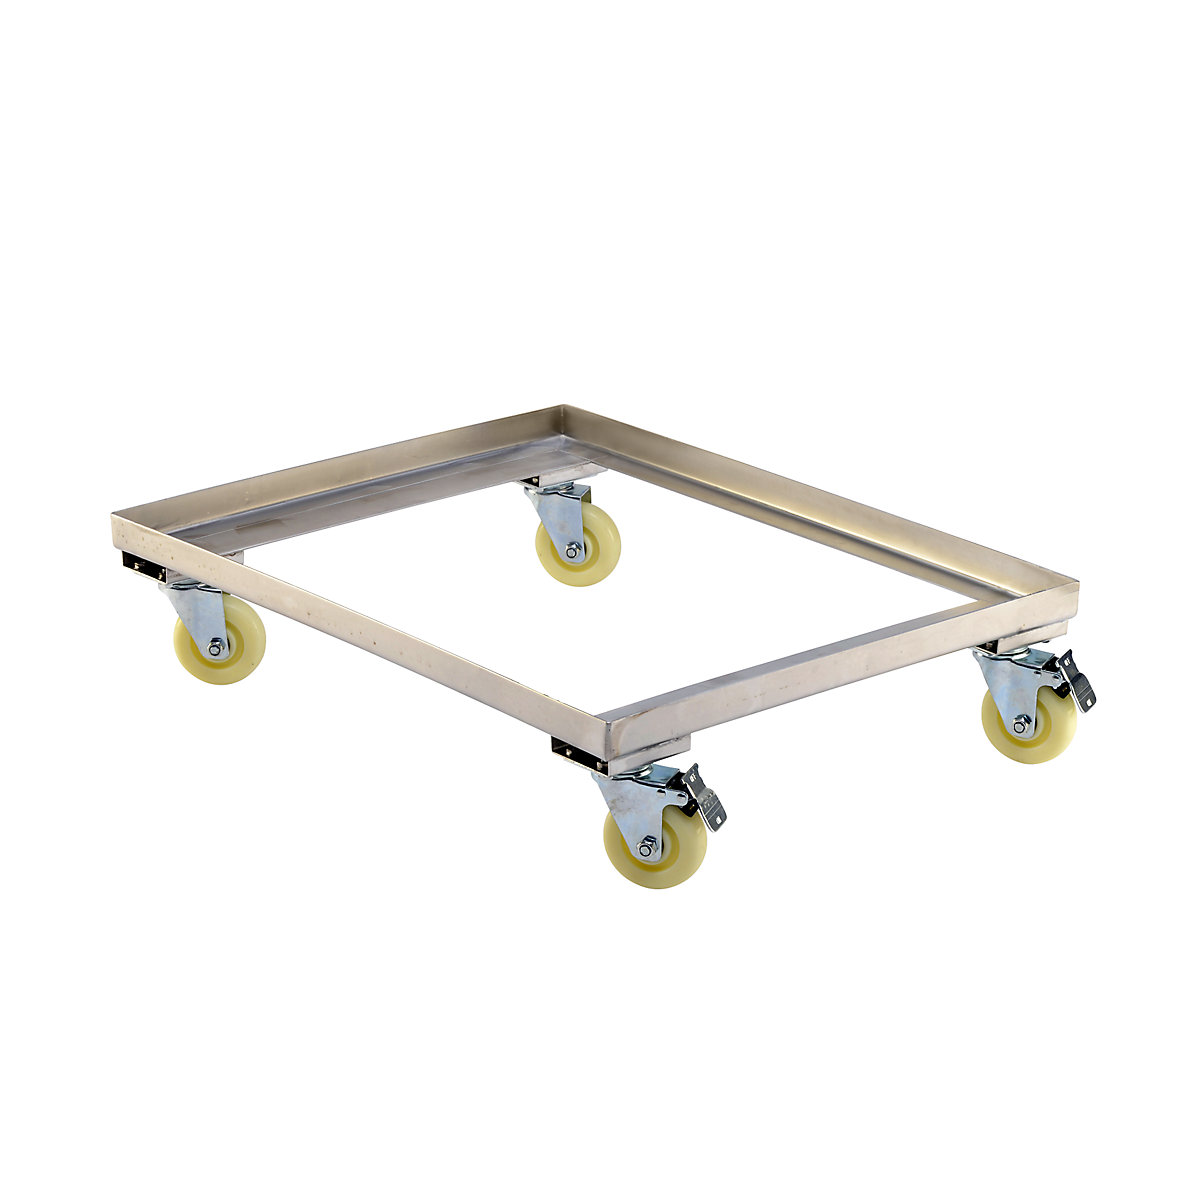 Stainless steel dolly